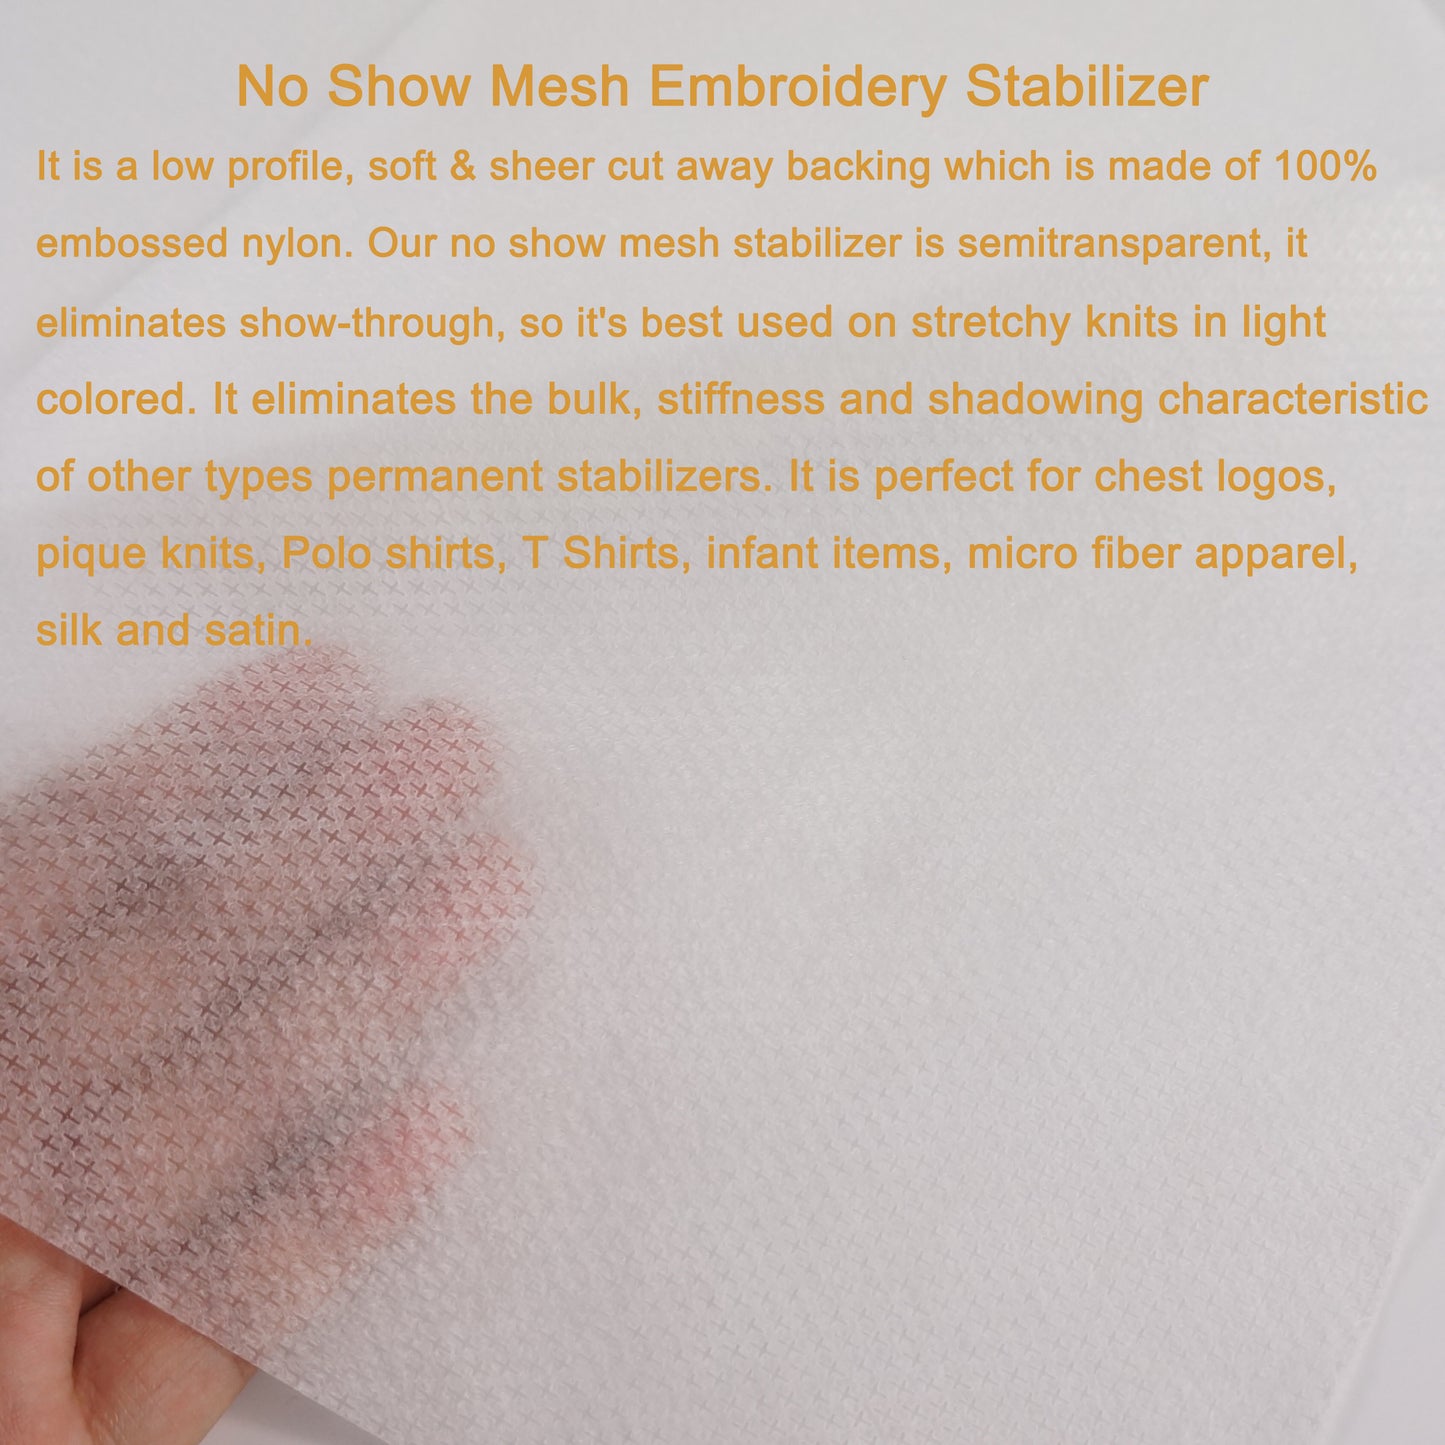 New brothread No Show Mesh Machine Embroidery Stabilizer Backing - Light Weight 1.8 oz